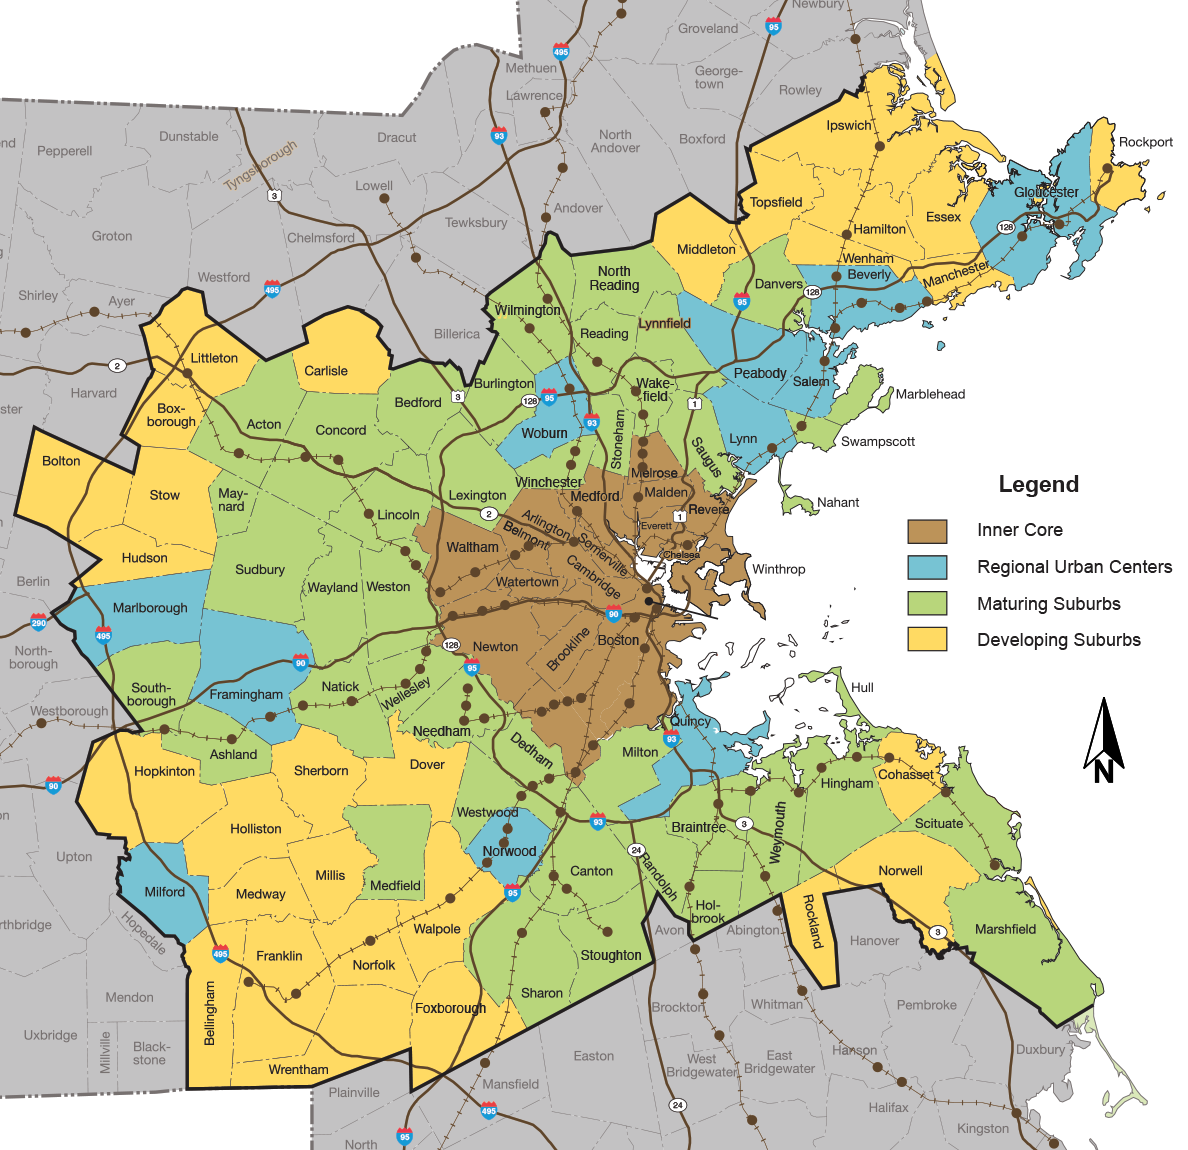 Figure 2-1 is map of the Boston Region MPO Area divided by the four Metropolitan Area Planning Council Community Types. The four Community Types are Inner Core, Regional Urban Centers, Maturing Suburbs and Developing Suburbs. 